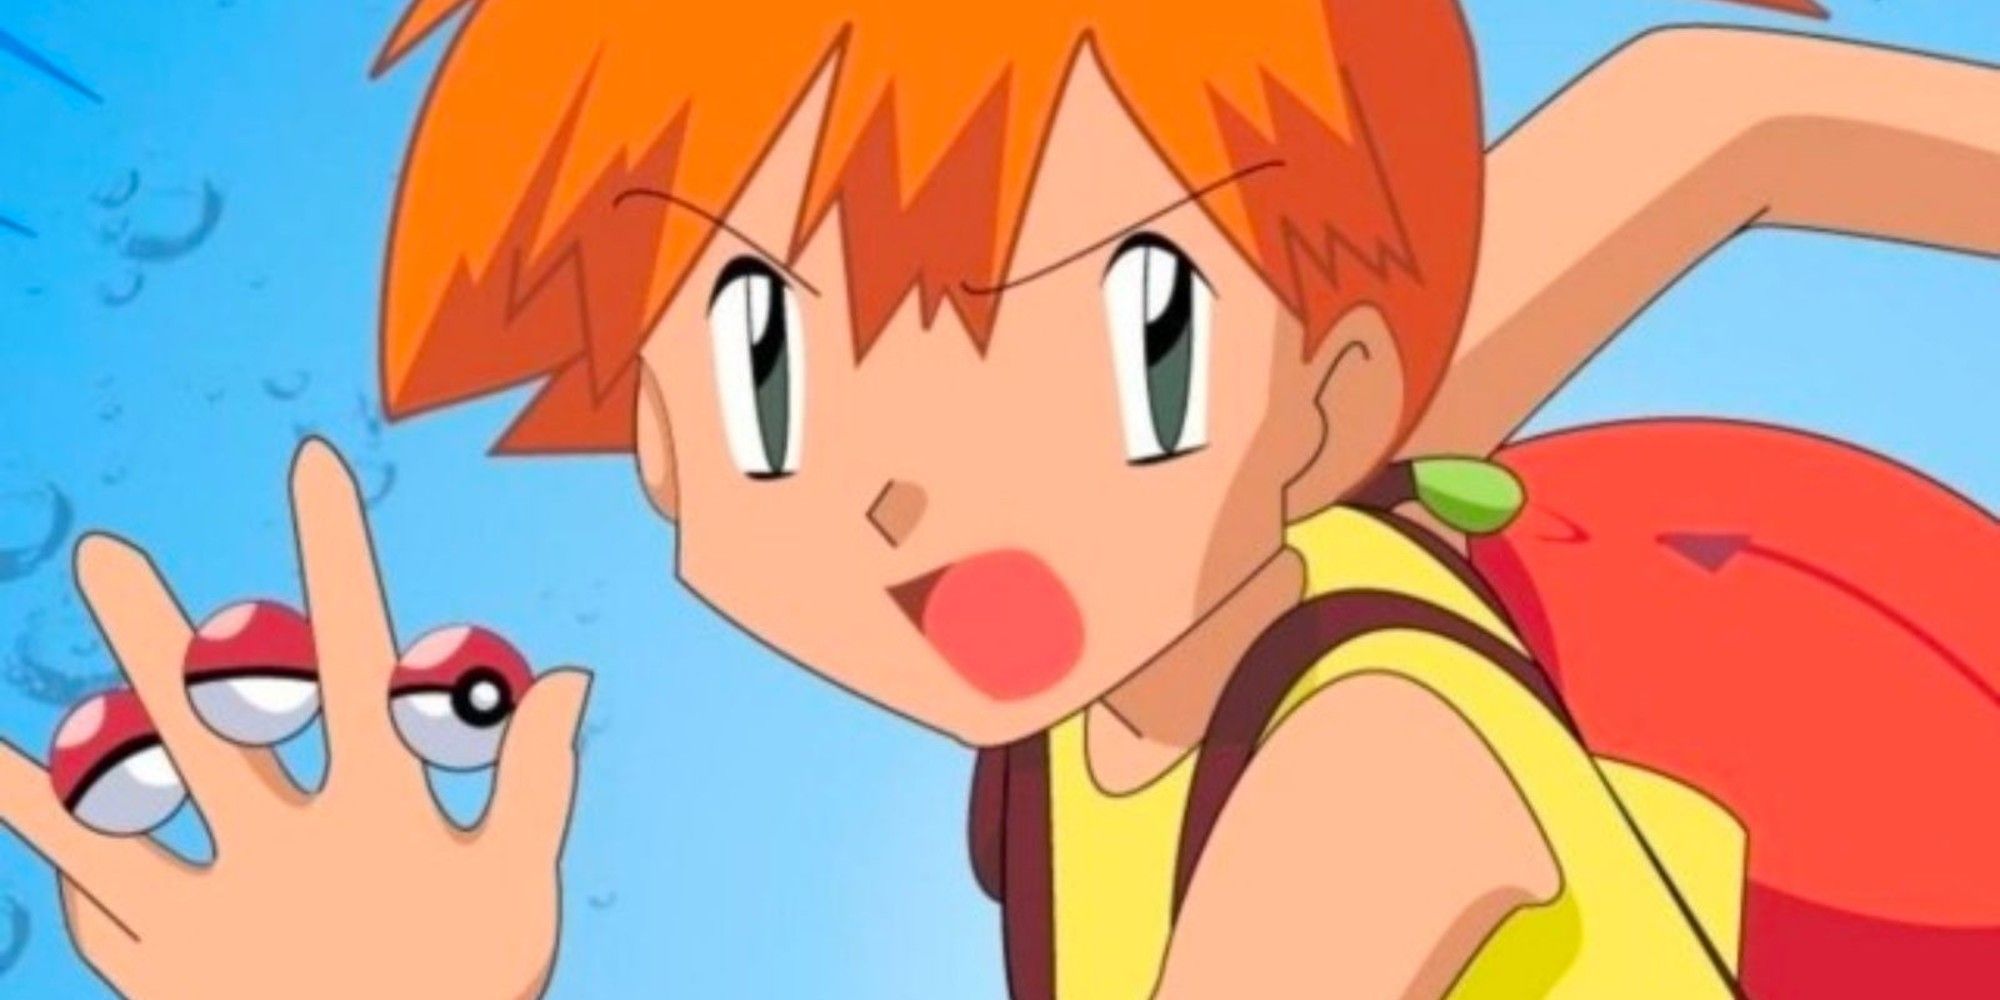 Misty with several Pokeballs from the Pokemon Anime, ready to fight